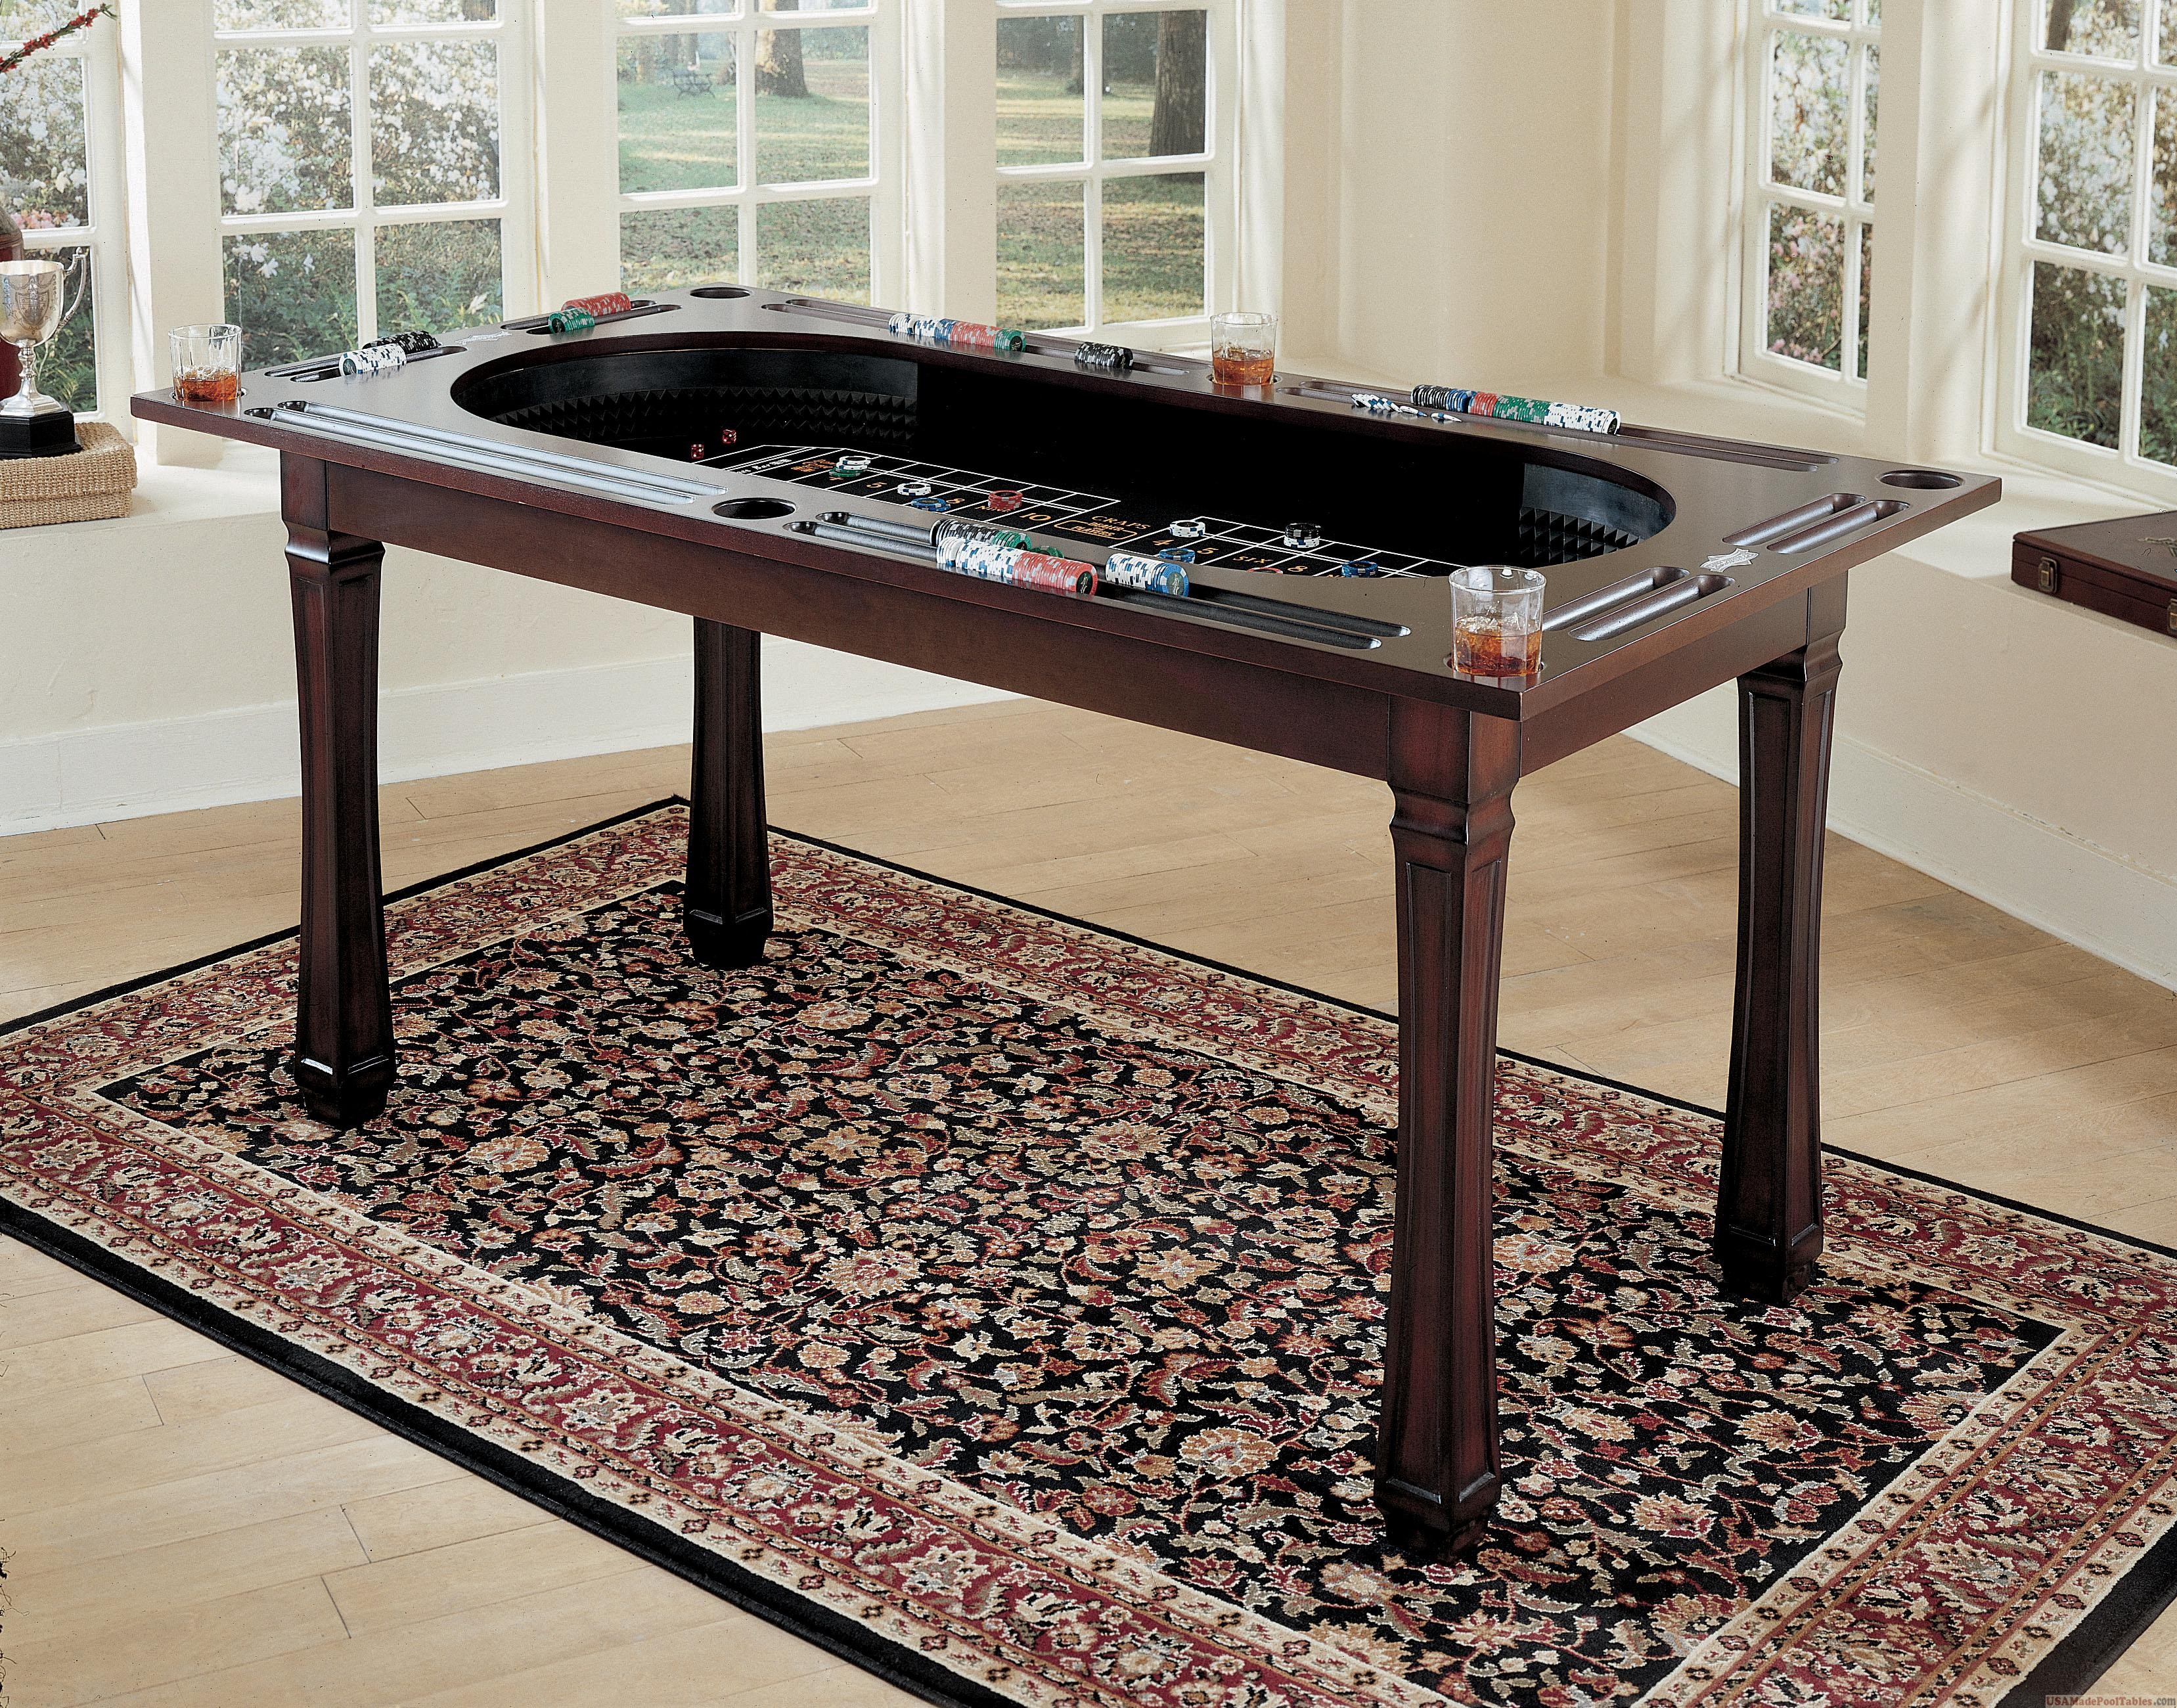 Pool table poker table dining table set